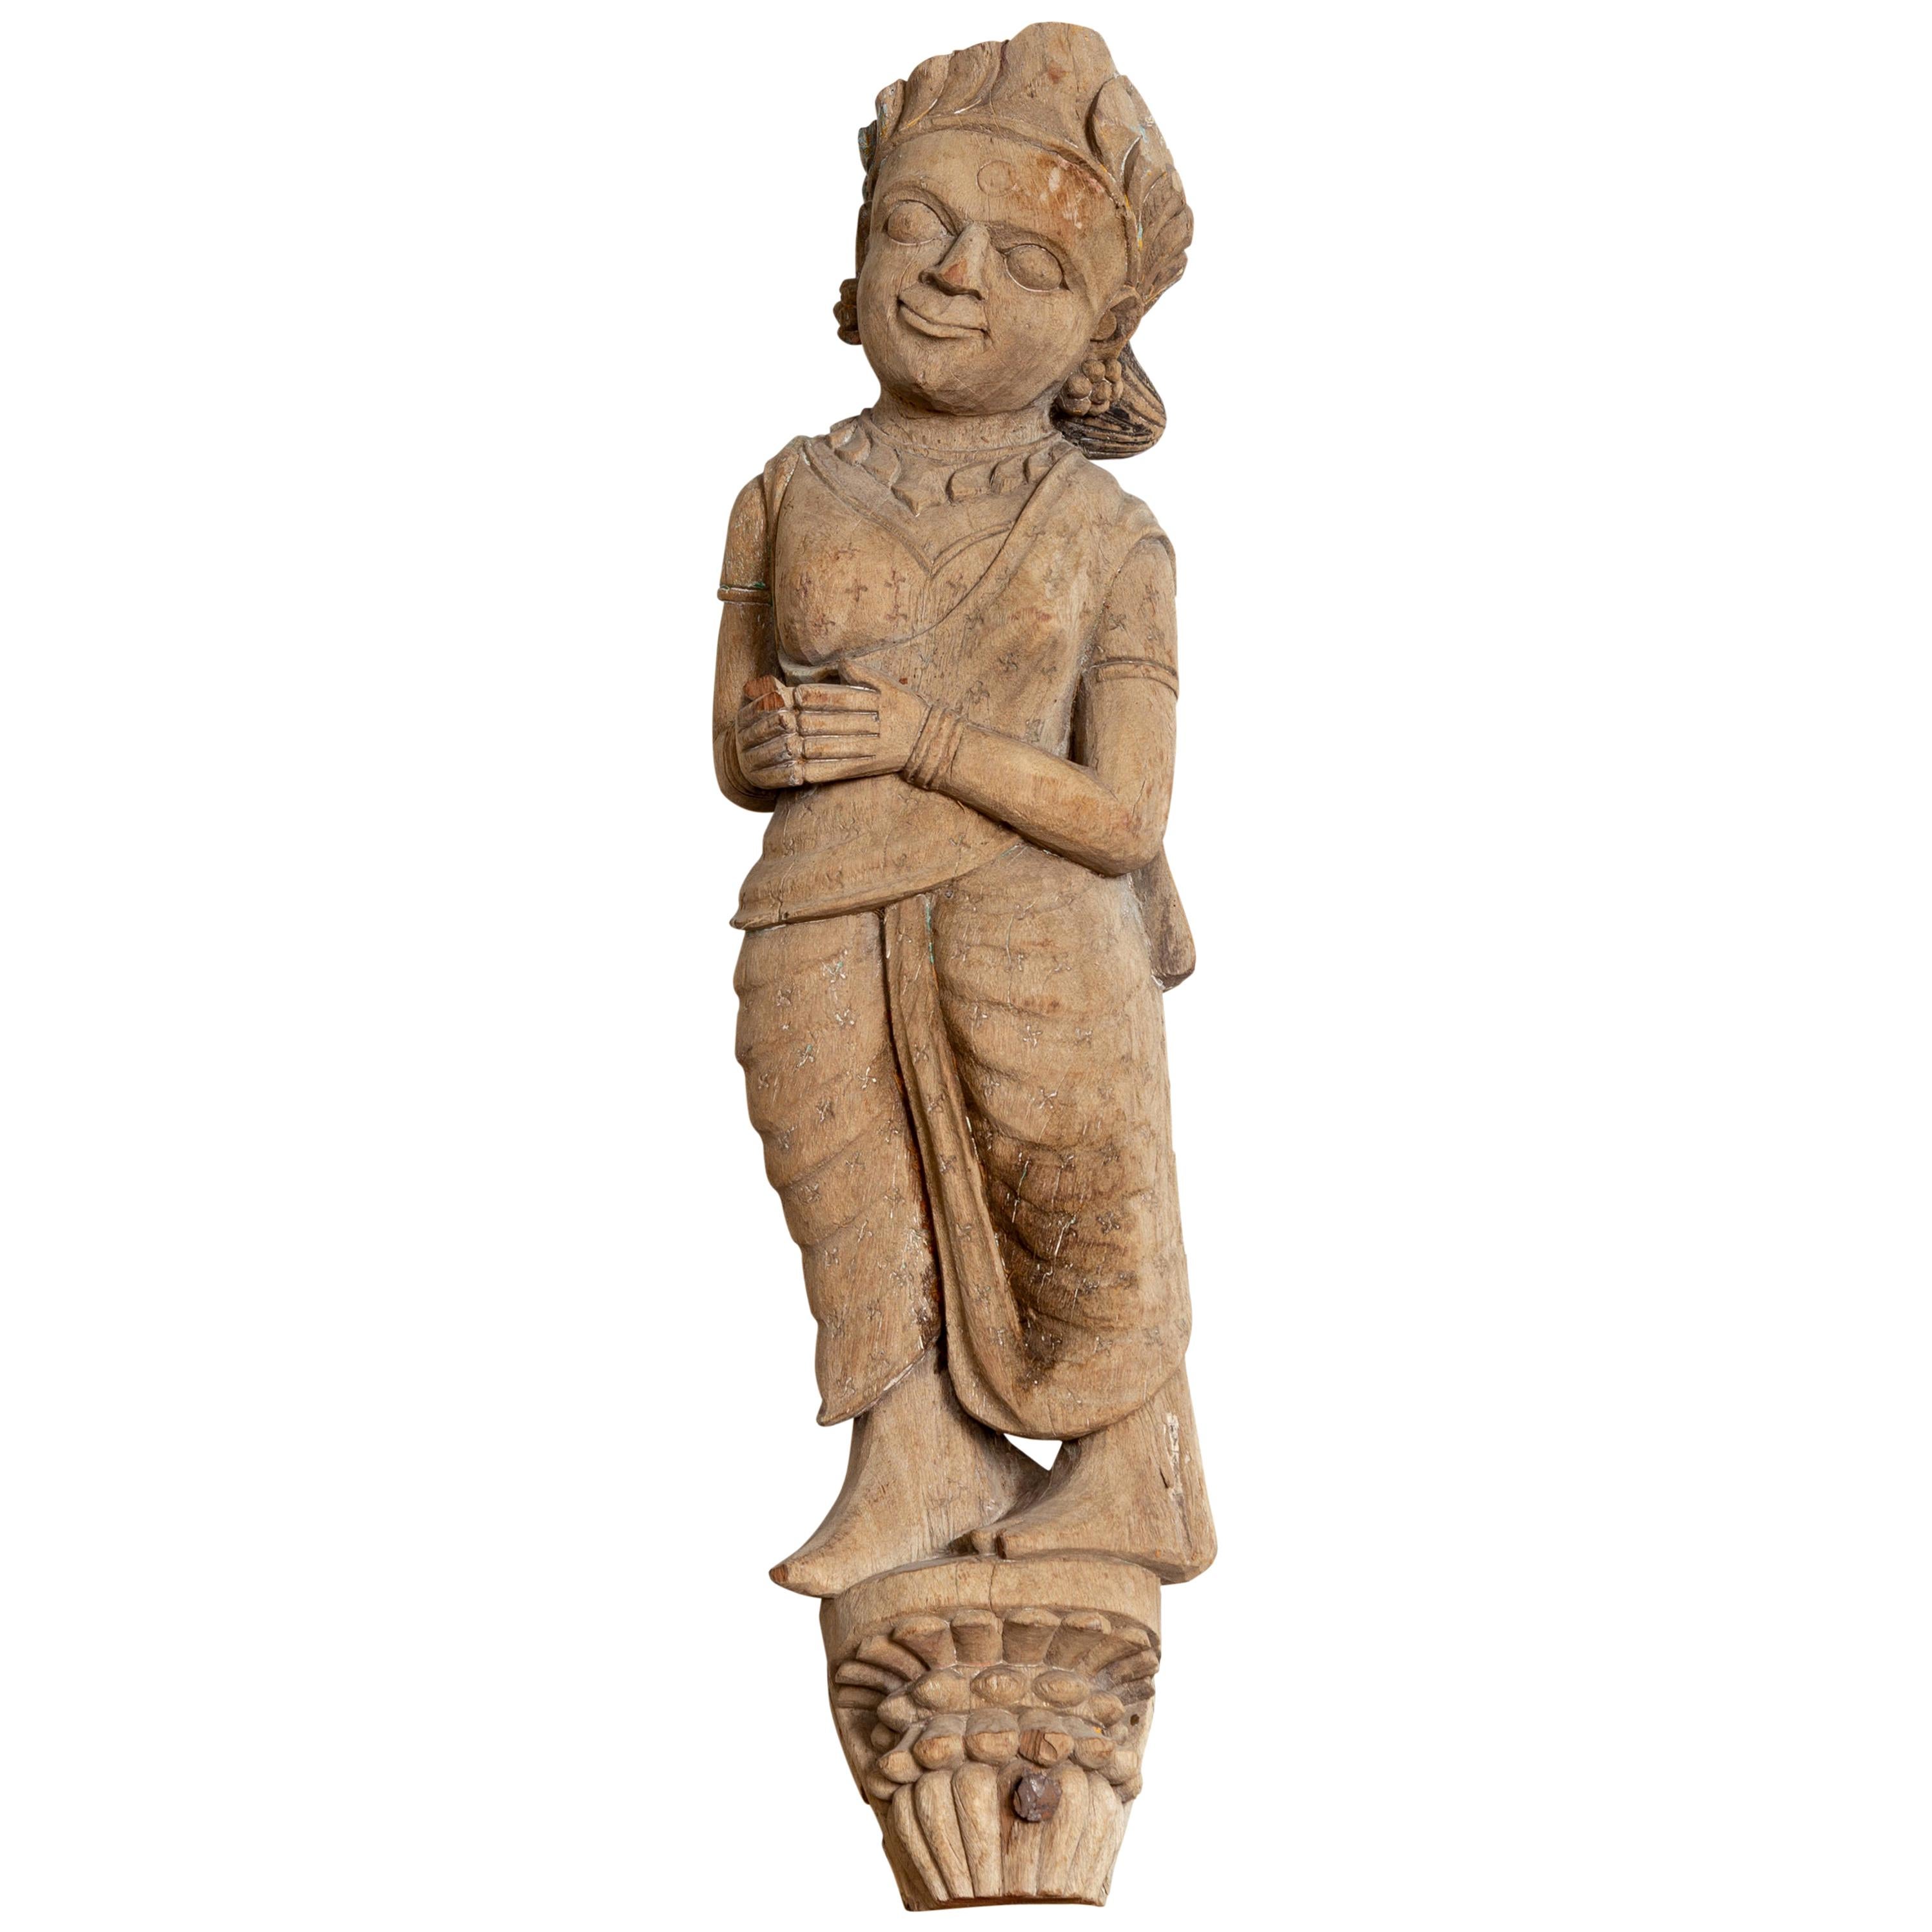 Antique Indian Gujarat Hand Carved Temple Carving Statue Depicting a Woman